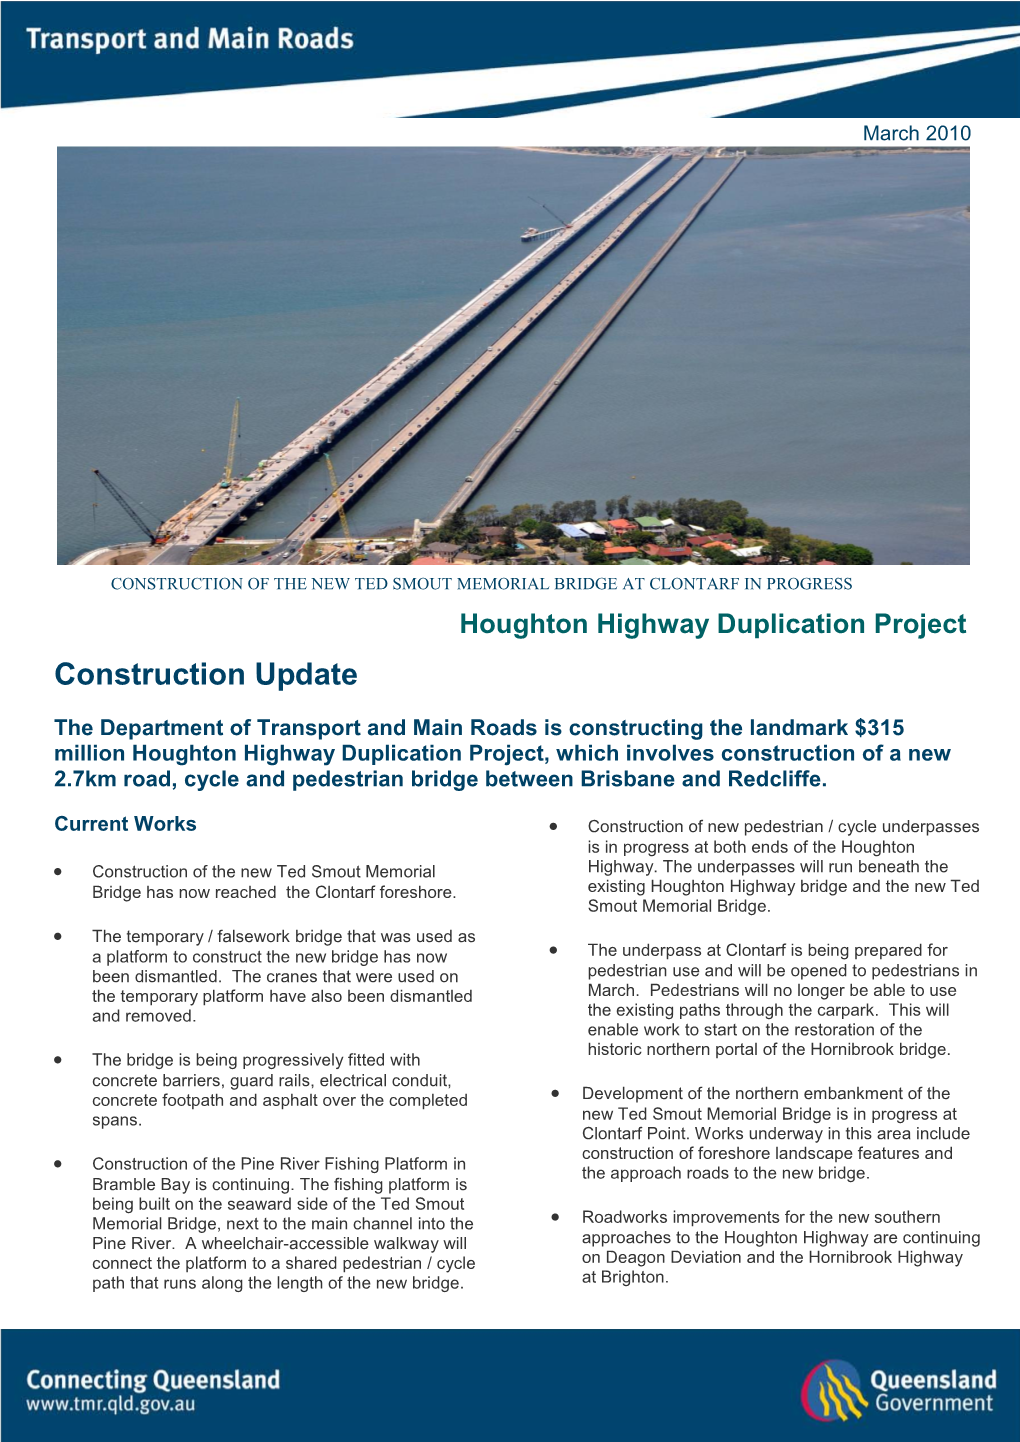 Houghton Highway Duplication Project Construction Update